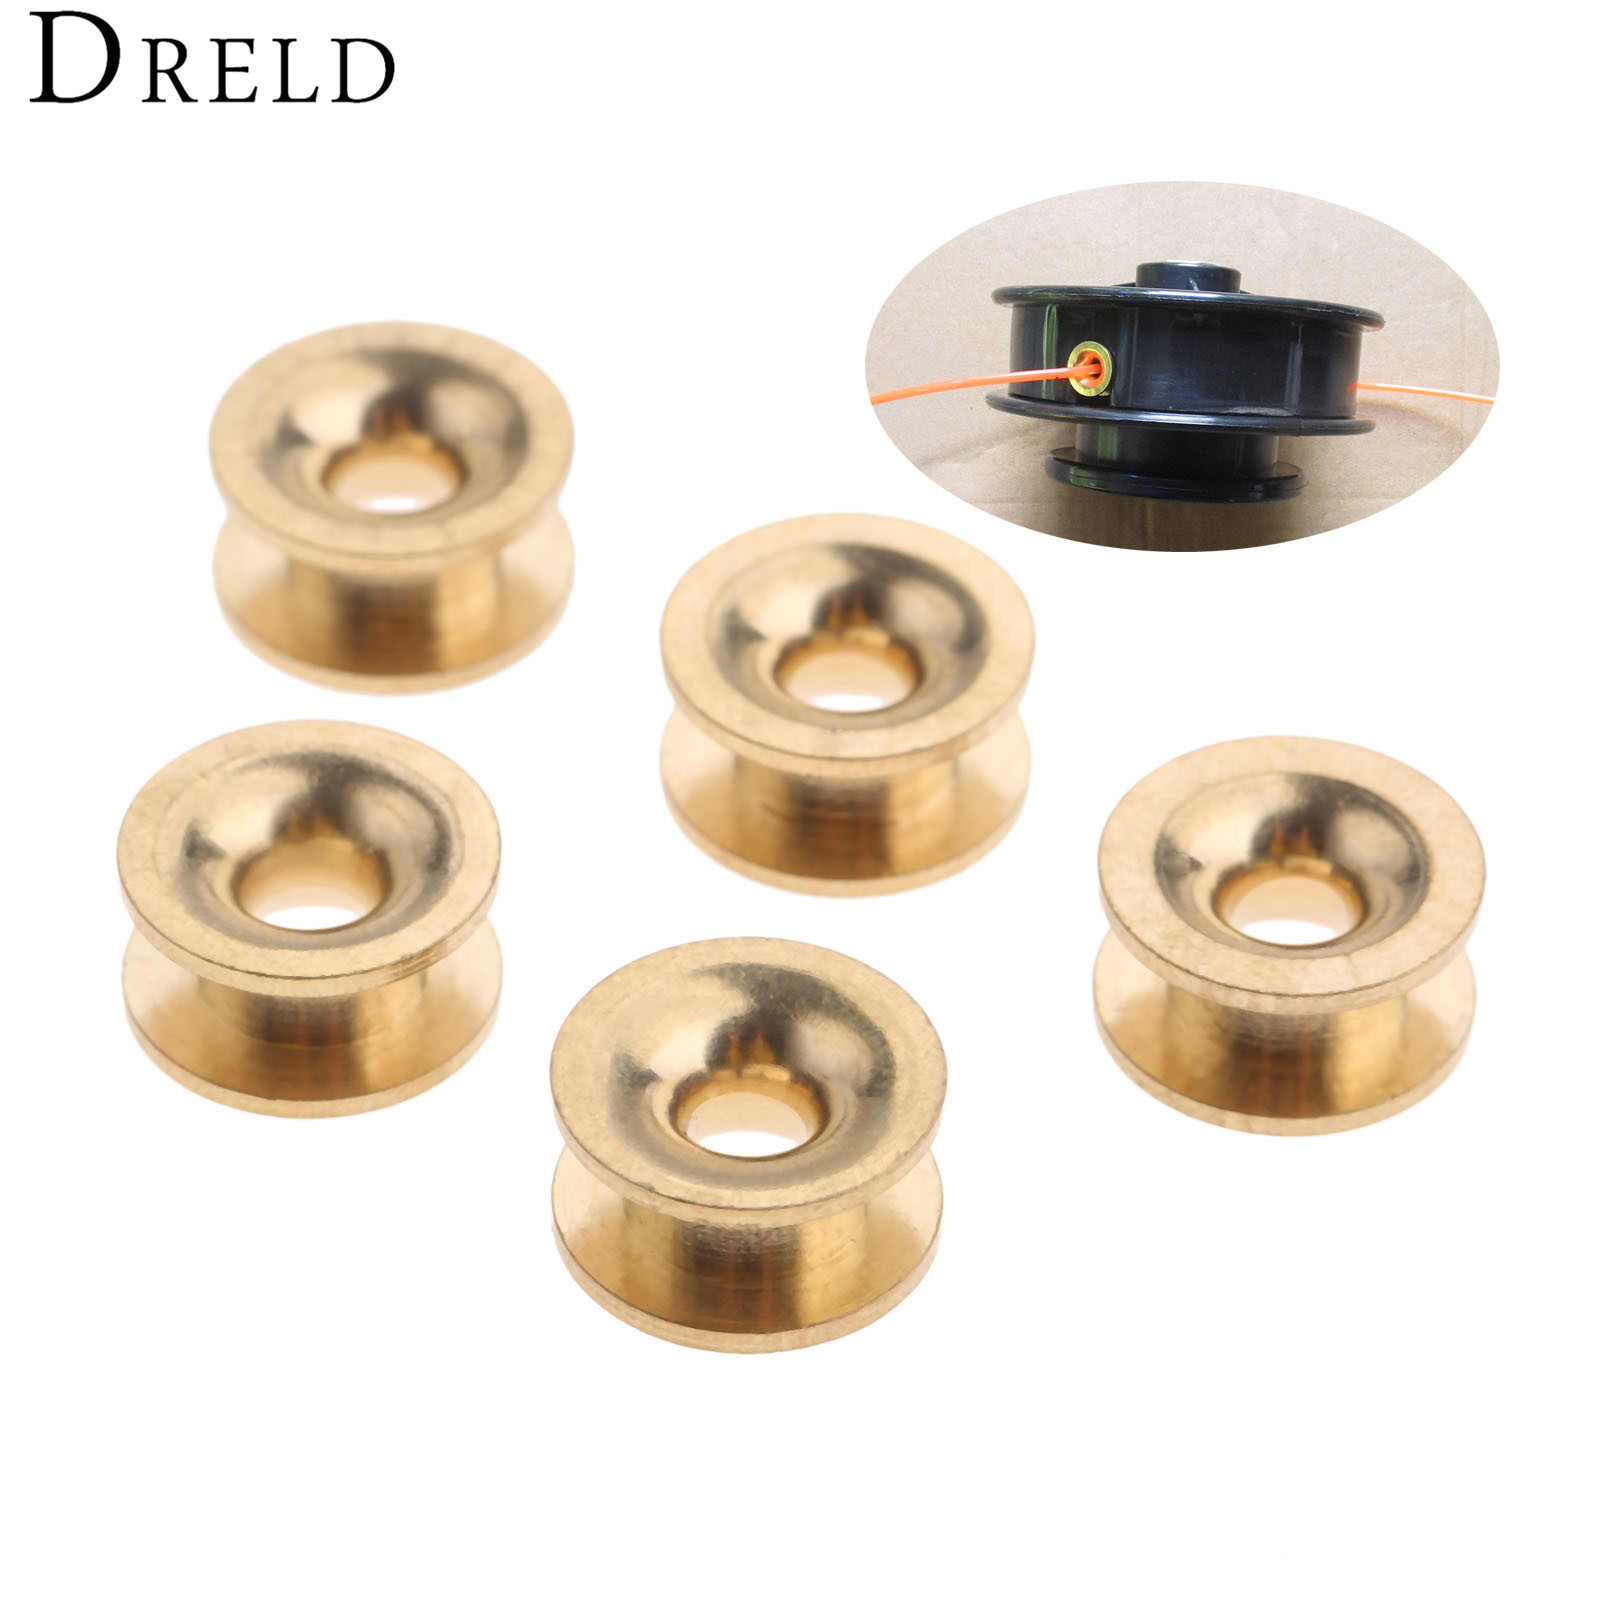 DRELD 5Pcs / lot ݼ Ʈ  Eyelet   Ϲ   Ƽ Ʈ   Ϲ /DRELD 5Pcs/lot Metal Trimmer Head Eyelet Garden Tool Parts For Universal H